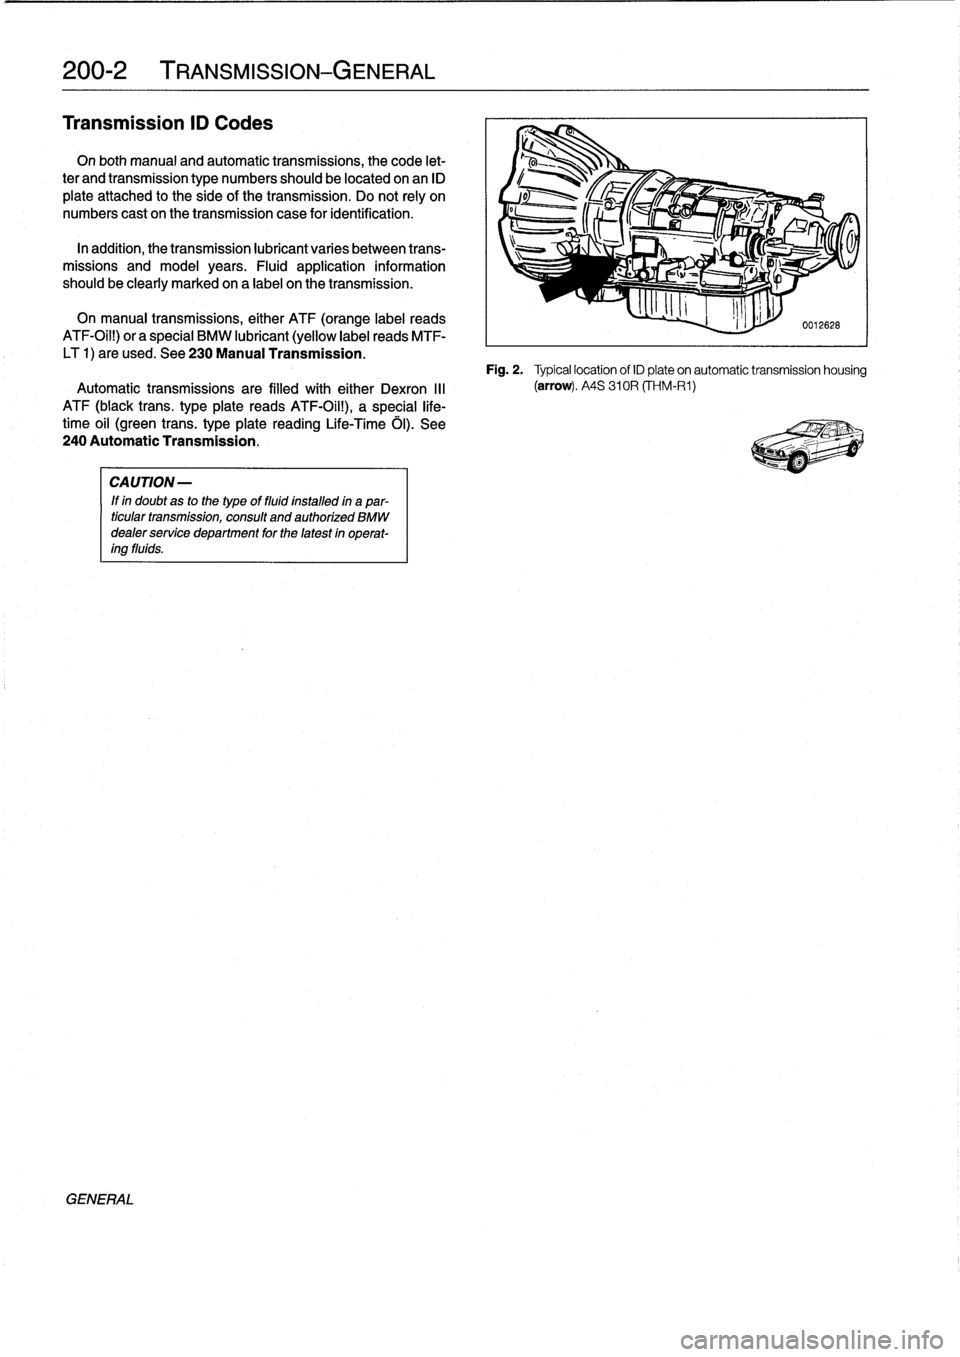 BMW 325i 1993 E36 Owners Manual 
200-2
TRANSMISSION-GENERAL

Transmission
ID
Codes

On
both
manual
and
automatic
transmissions,
the
code
let-

ter
and
transmission
type
numbers
should
be
located
onan
ID

plate
attached
to
the
síde
